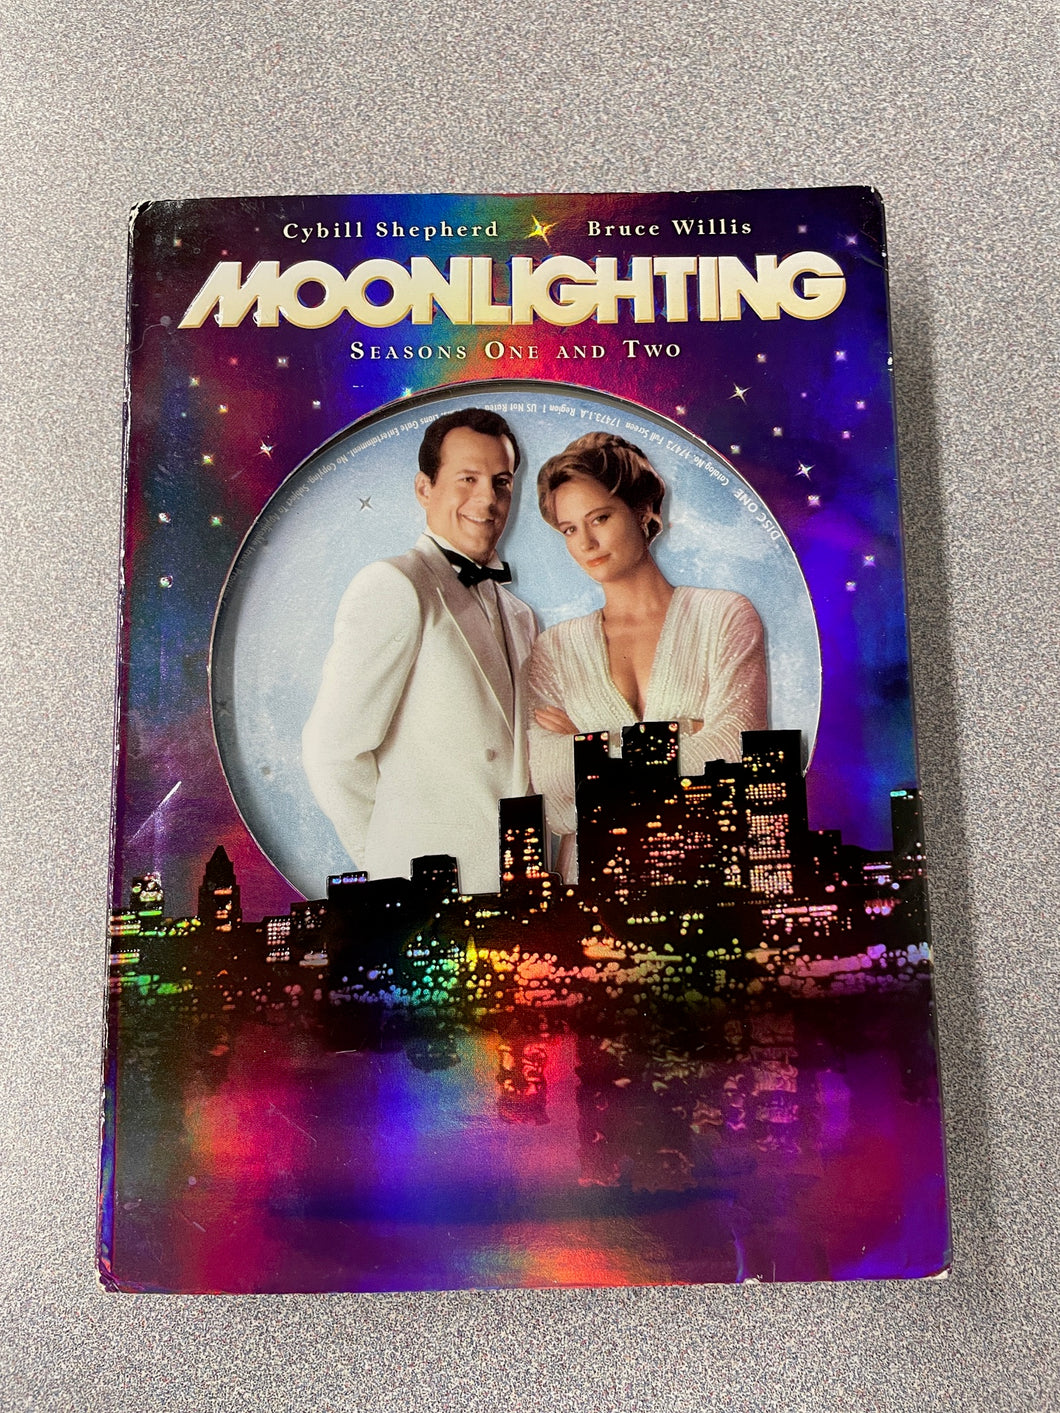 Moonlighting: Seasons One and Two [2005] DVD 1/24